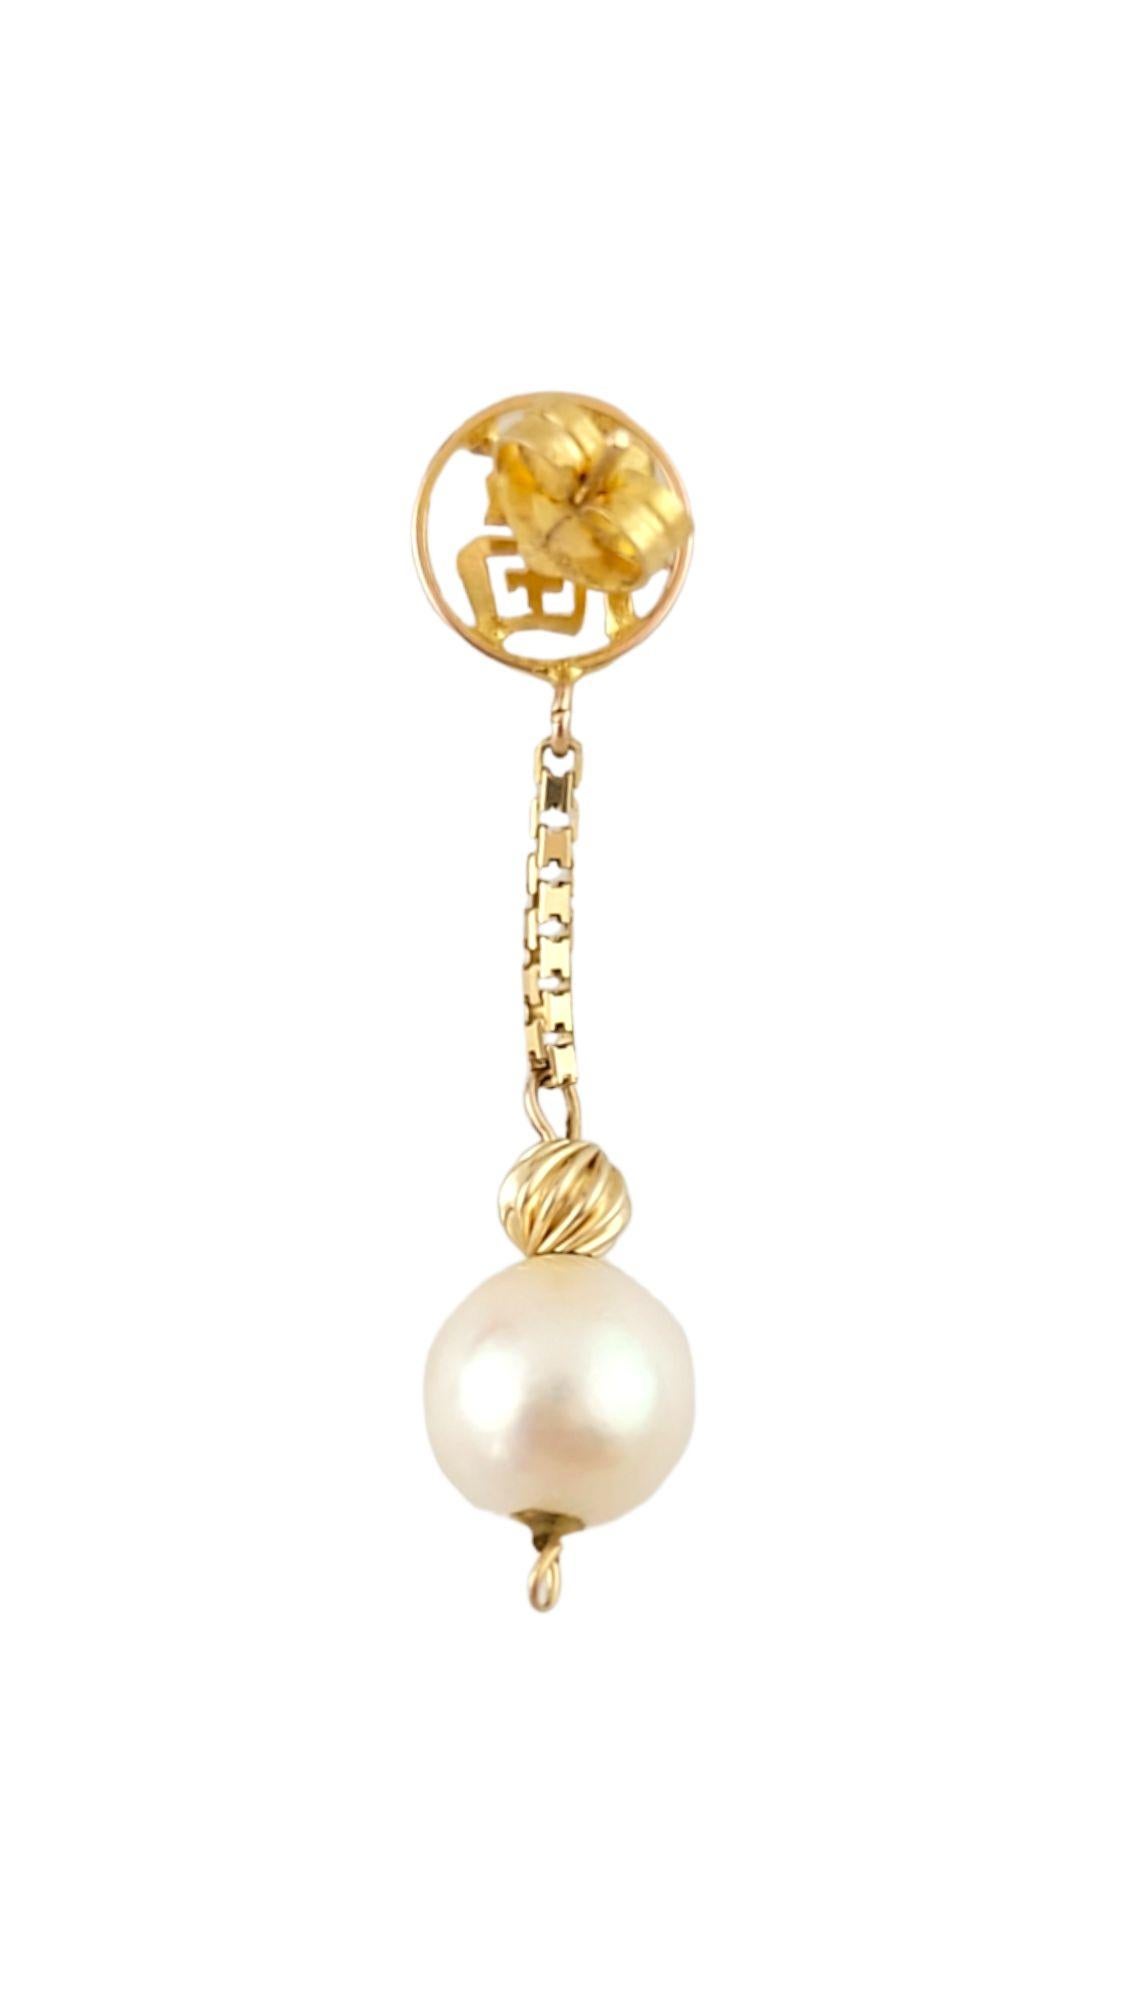 This gorgeous set of 14K gold dangle earrings features 2 beautiful pearls!

Pearls: 8mm each

Dangle length: 36.5mm

Weight: 2.77 g/ 1.8 dwt

Hallmark: CF 14K585

Very good condition, professionally polished.

Will come packaged in a gift box or